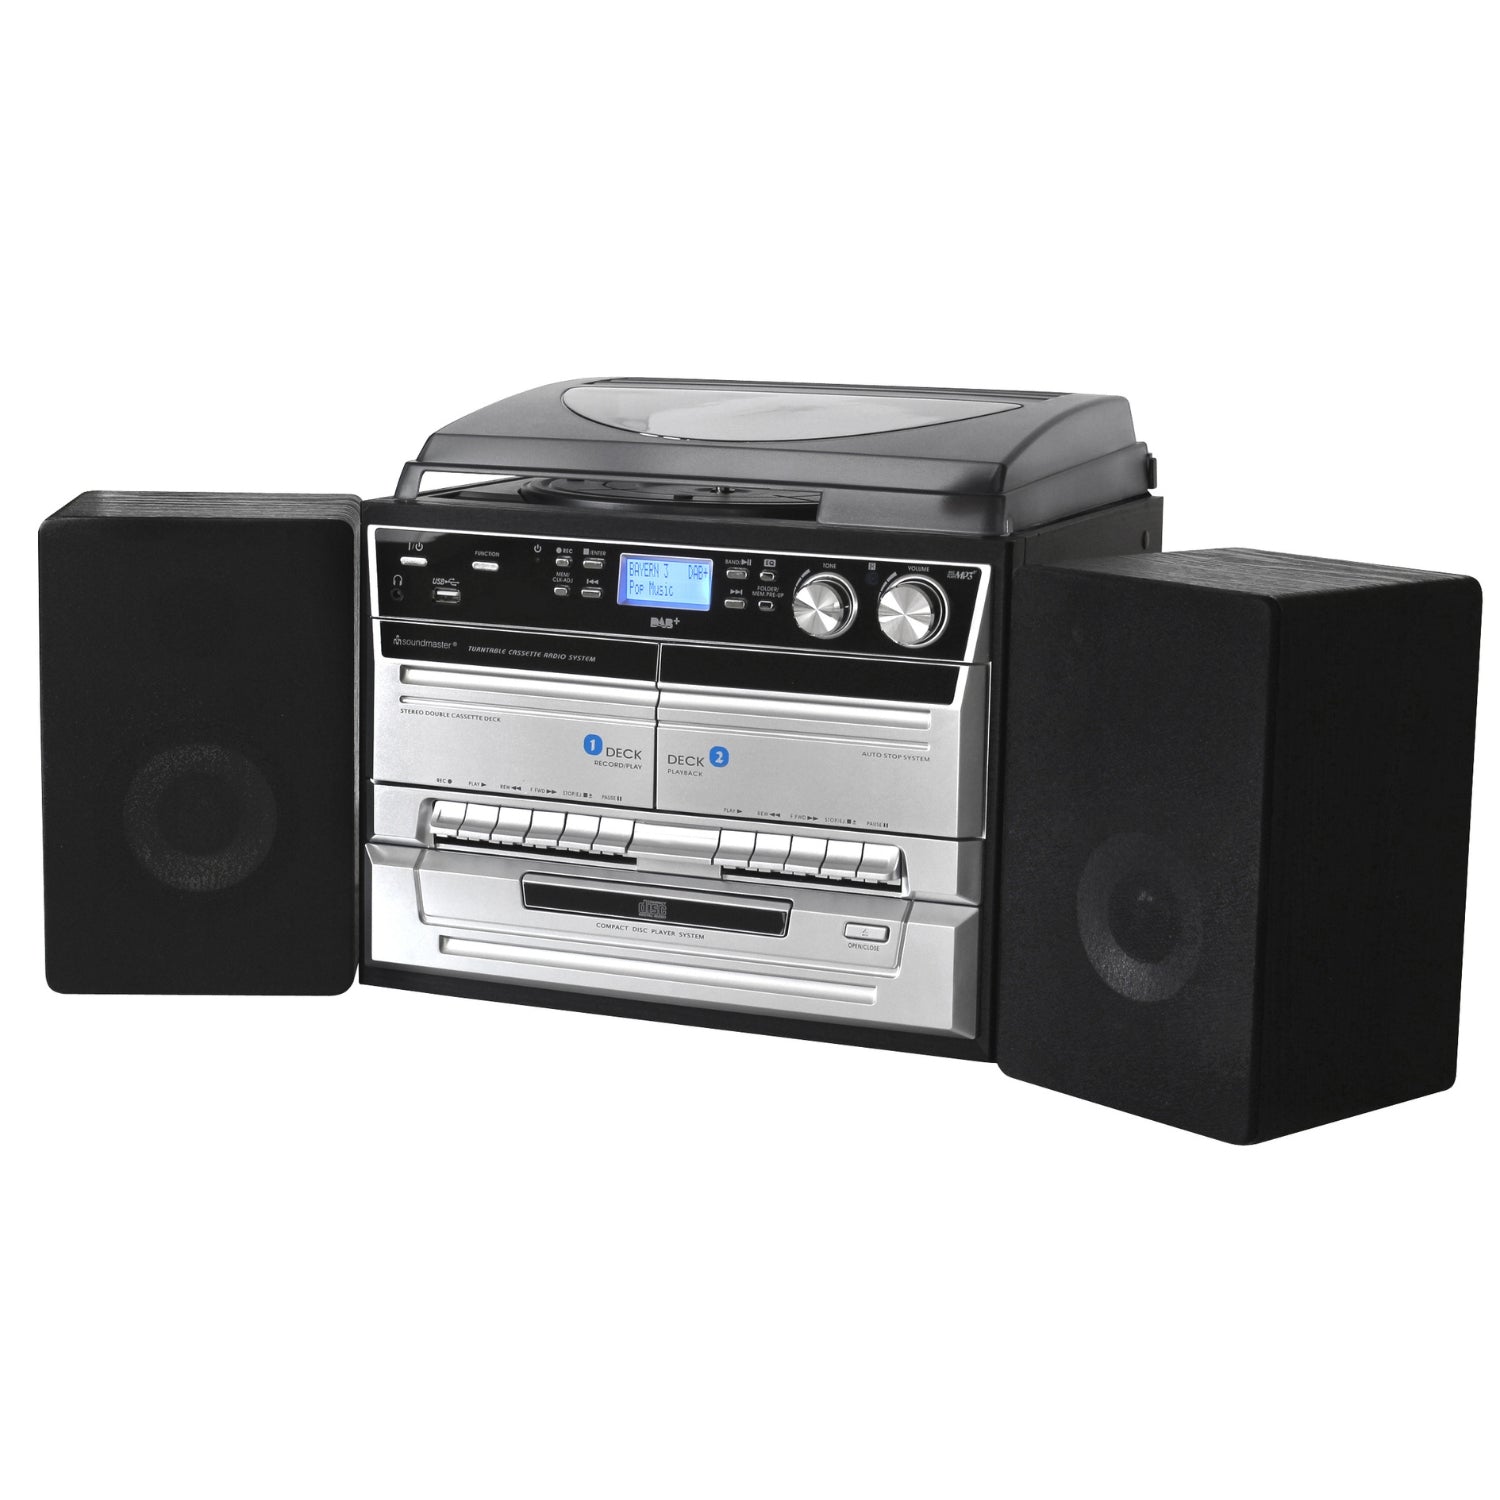 Soundmaster MCD5550SW stereo system DAB+ double cassette Bluetooth CD MP3 turntable USB encoding digitization